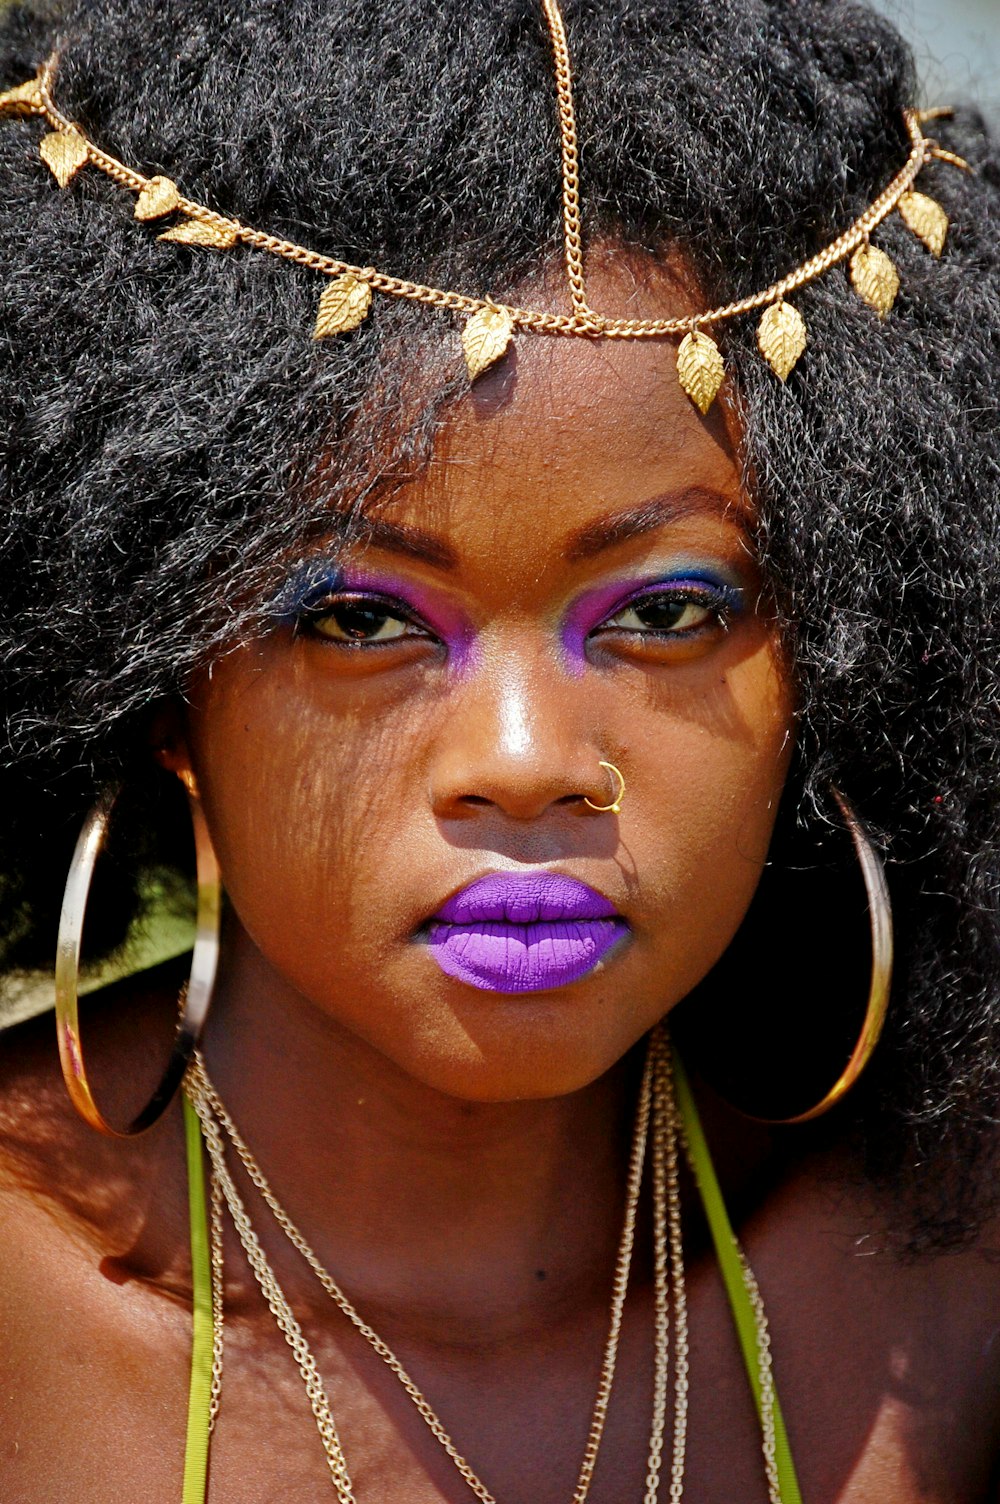 woman with black hair wears gold-colored nose ring, pair of loop earrings and purple lipstick